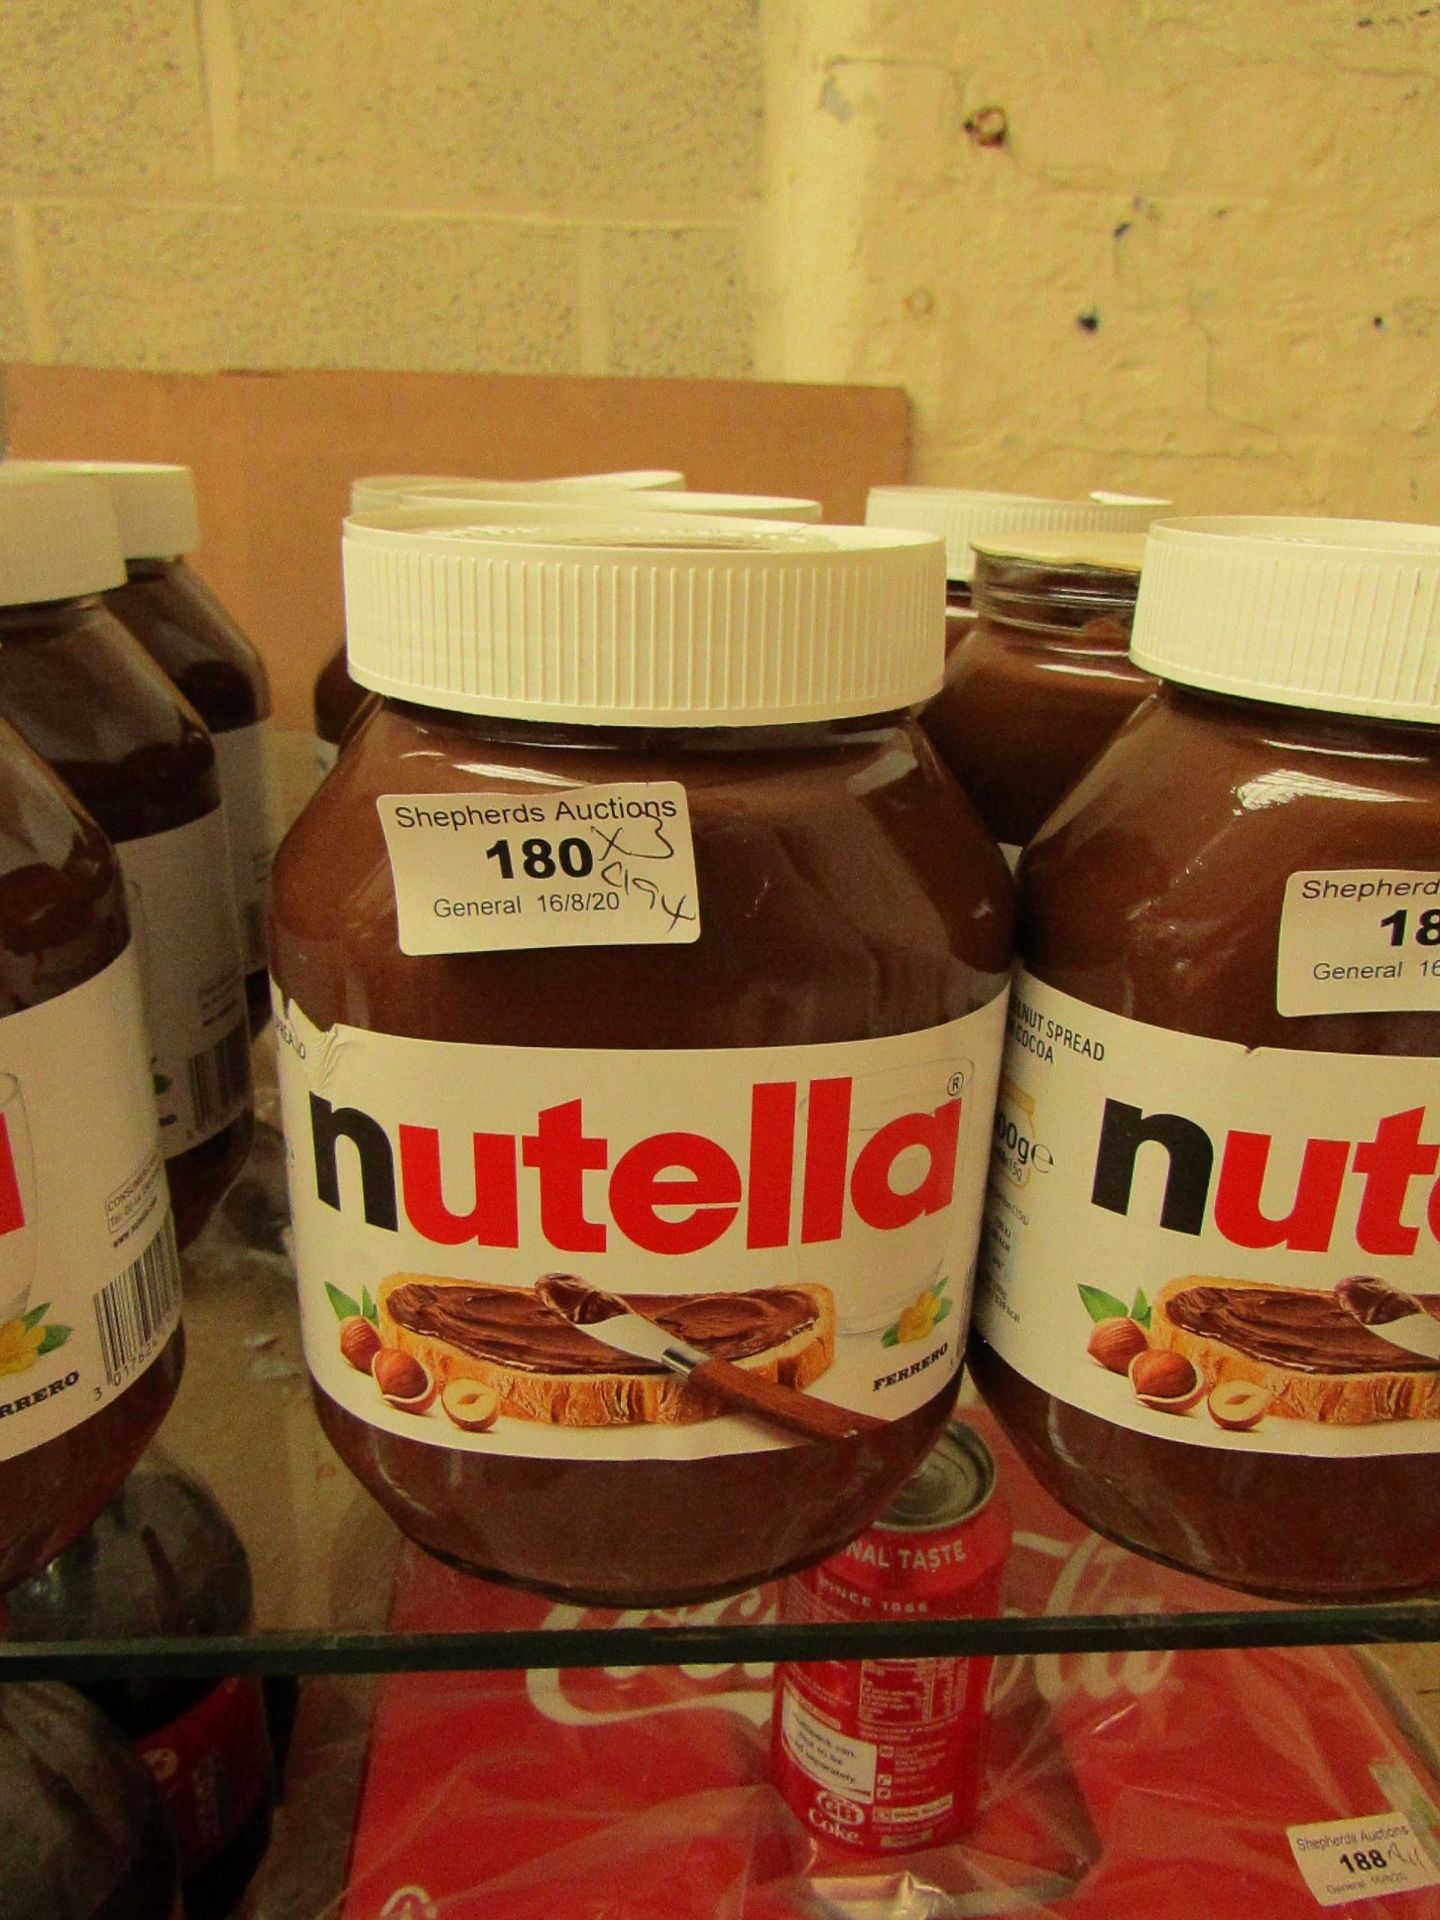 3x Nutella - Hazelnut Spread with Cocoa (1000G) - BB 11/05/21 - Note Lids are Damaged But Still